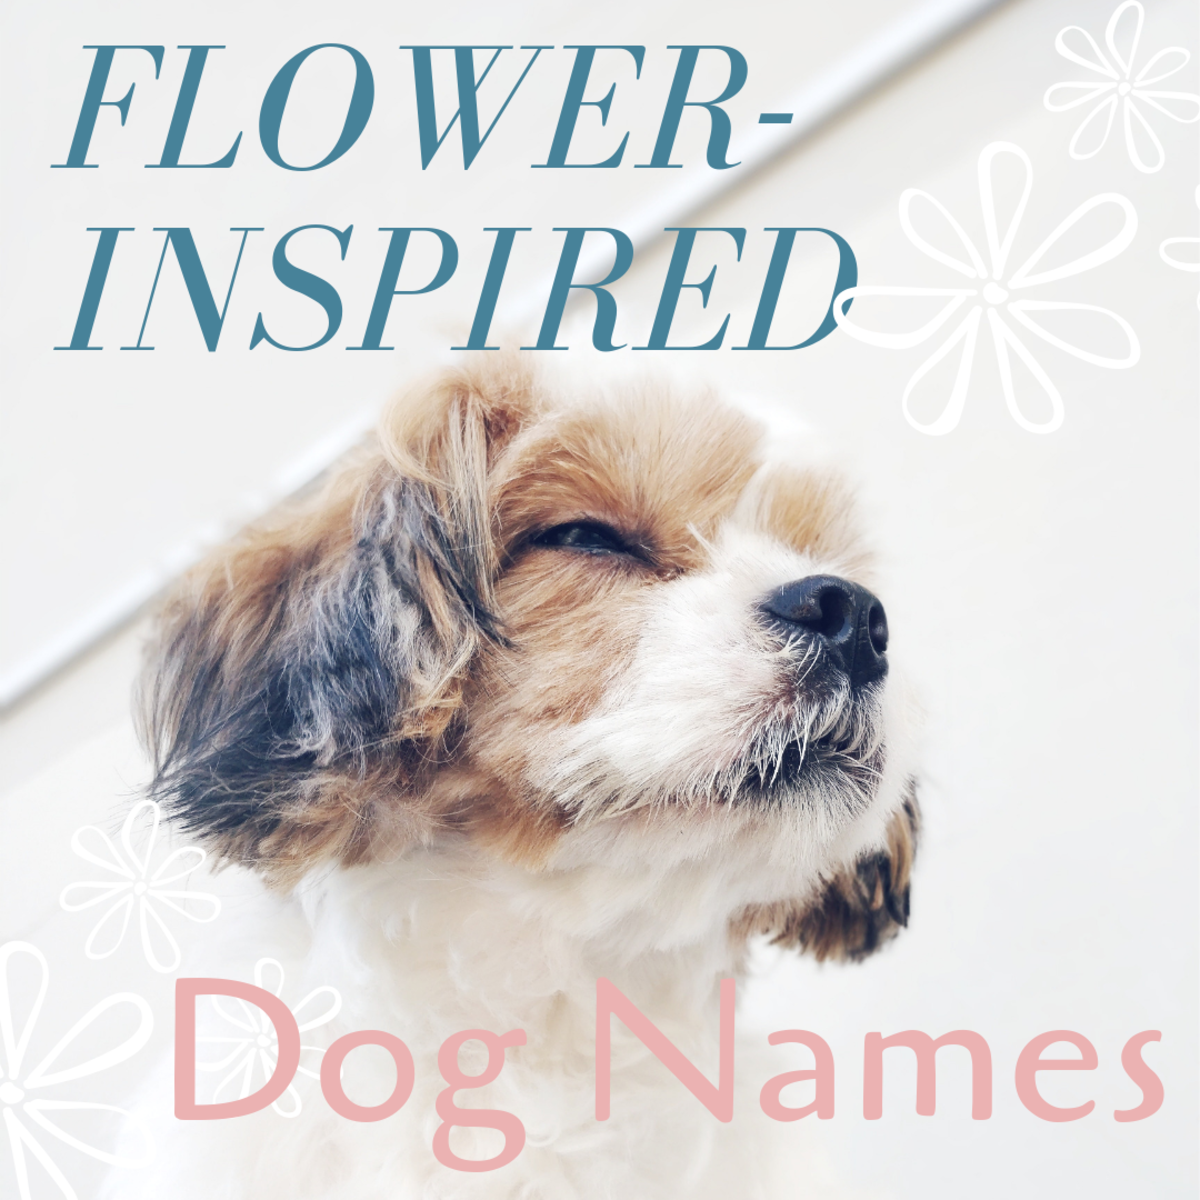 150 Beautiful Flower Names For Dogs Pethelpful By Fellow Animal Lovers And Experts,Types Of Window Coverings For Sliding Glass Doors